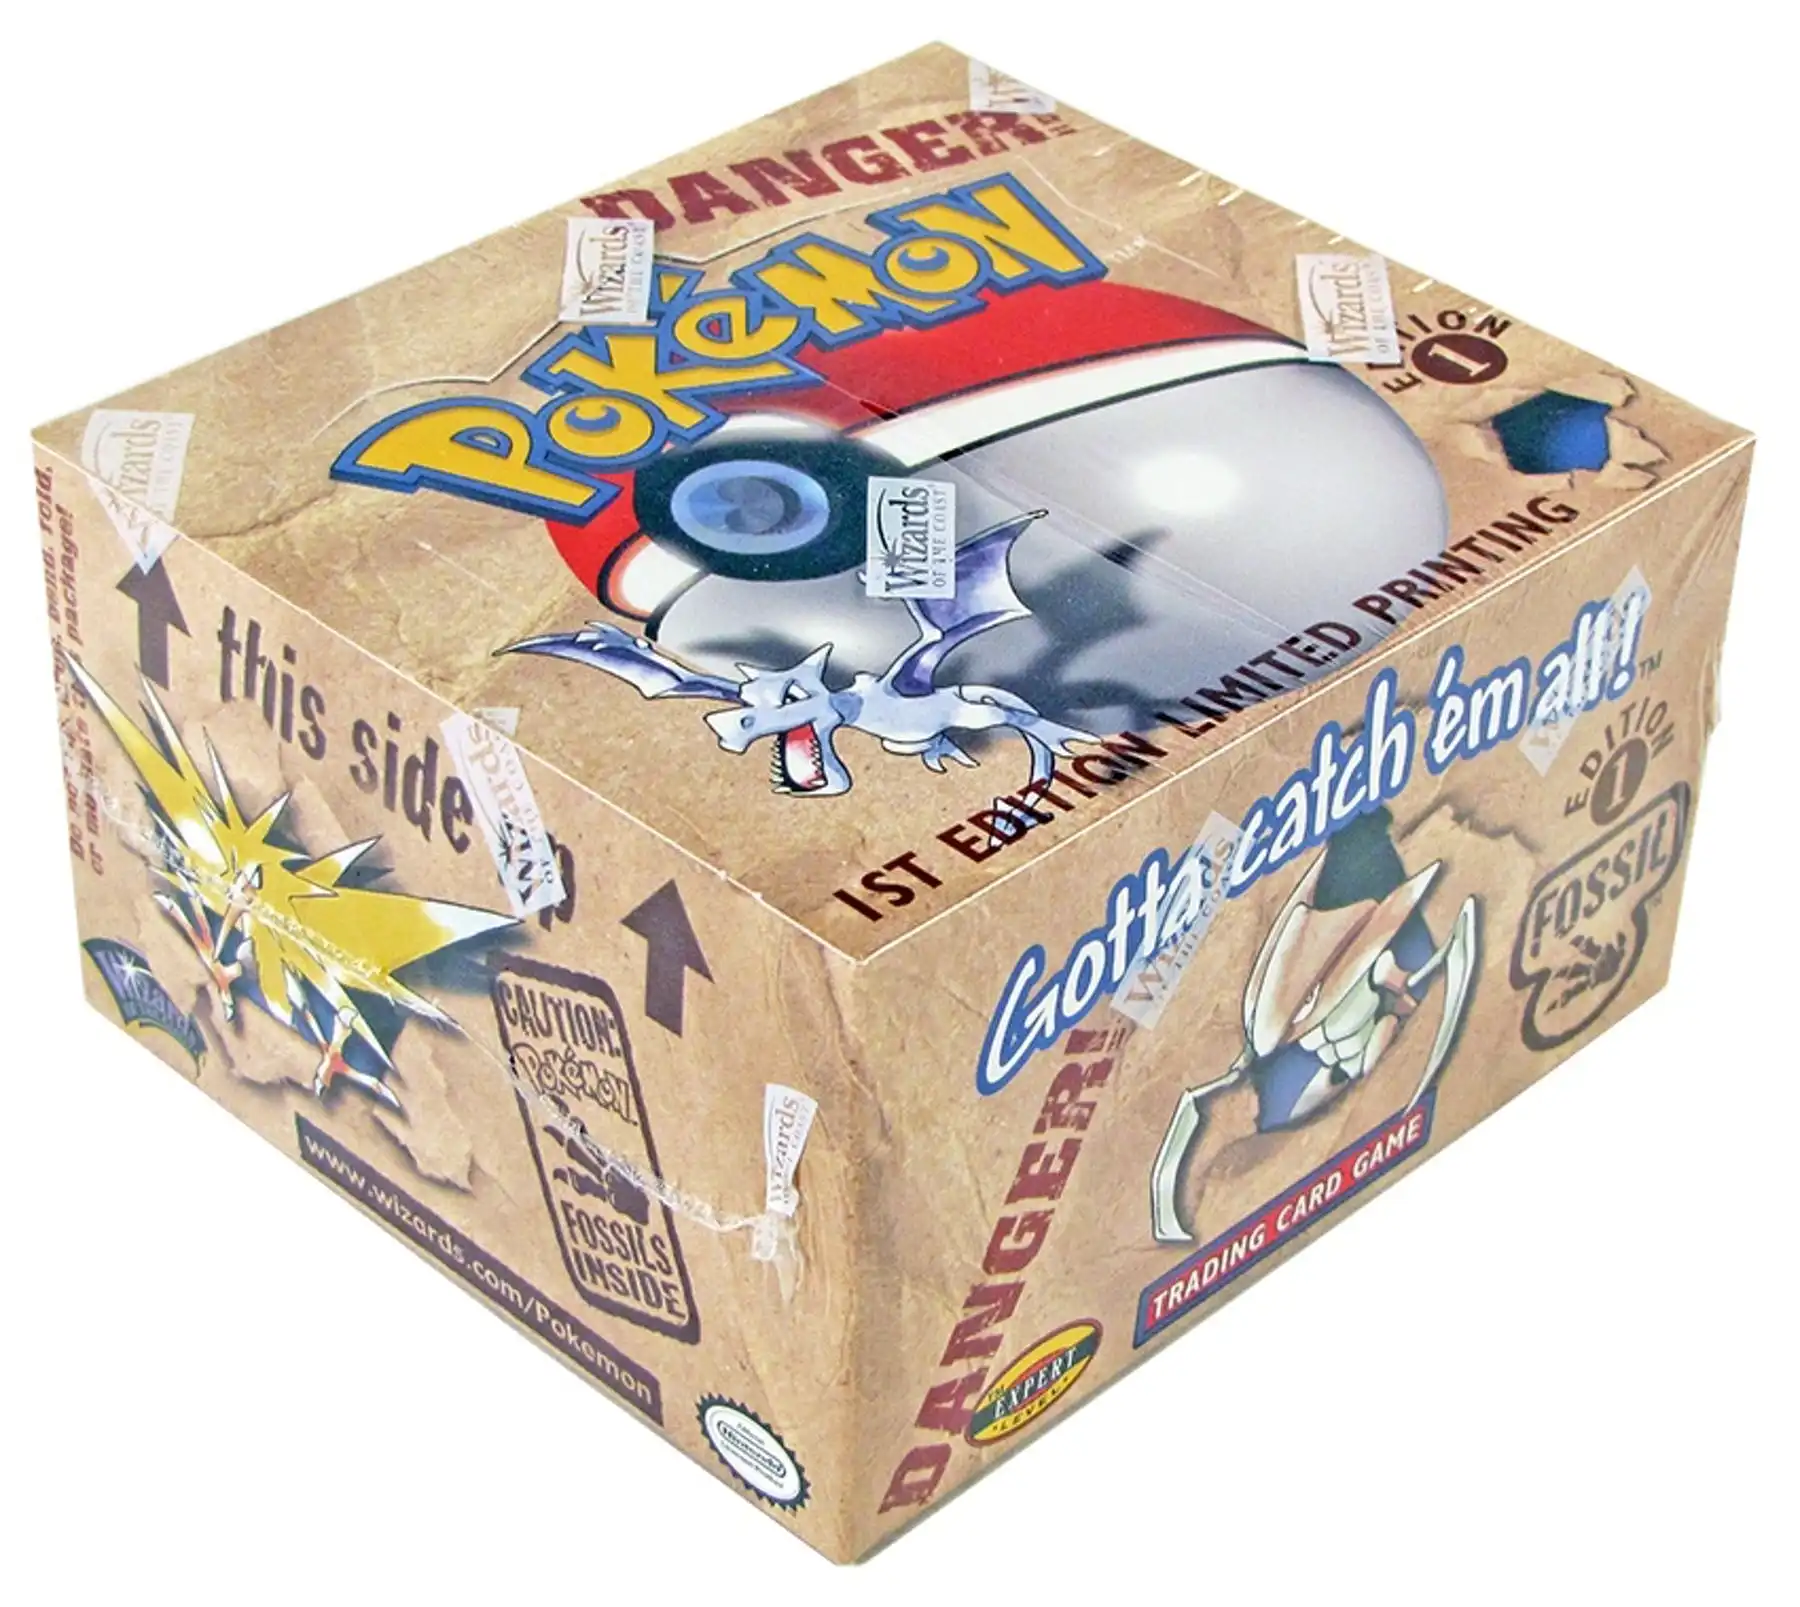 Pokemon Fossil 1st Edition Booster Box